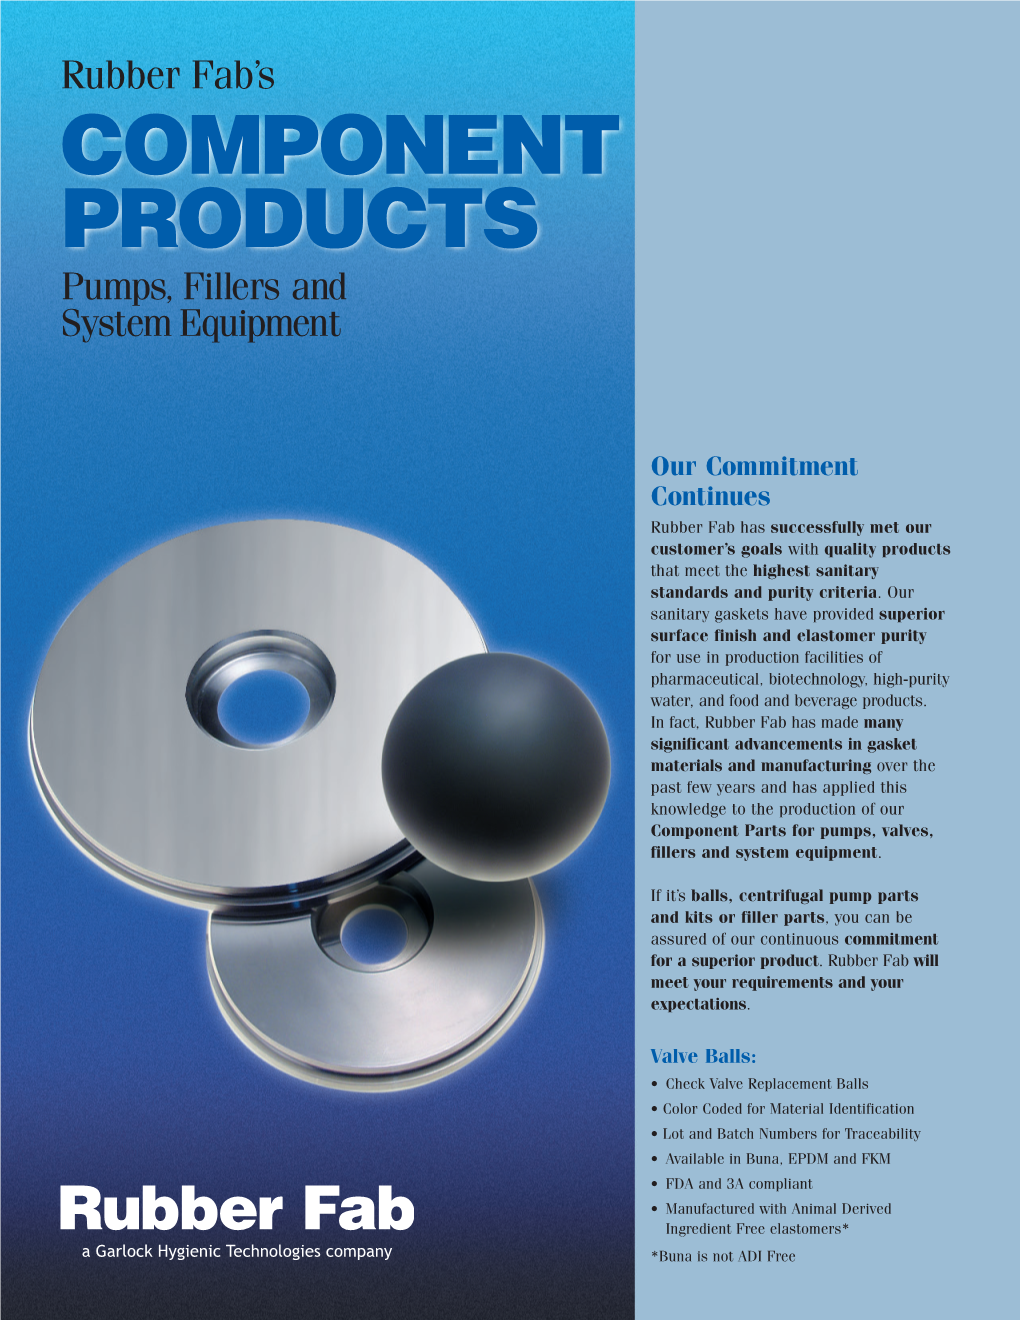 COMPONENT PRODUCTS Pumps, Fillers and System Equipment